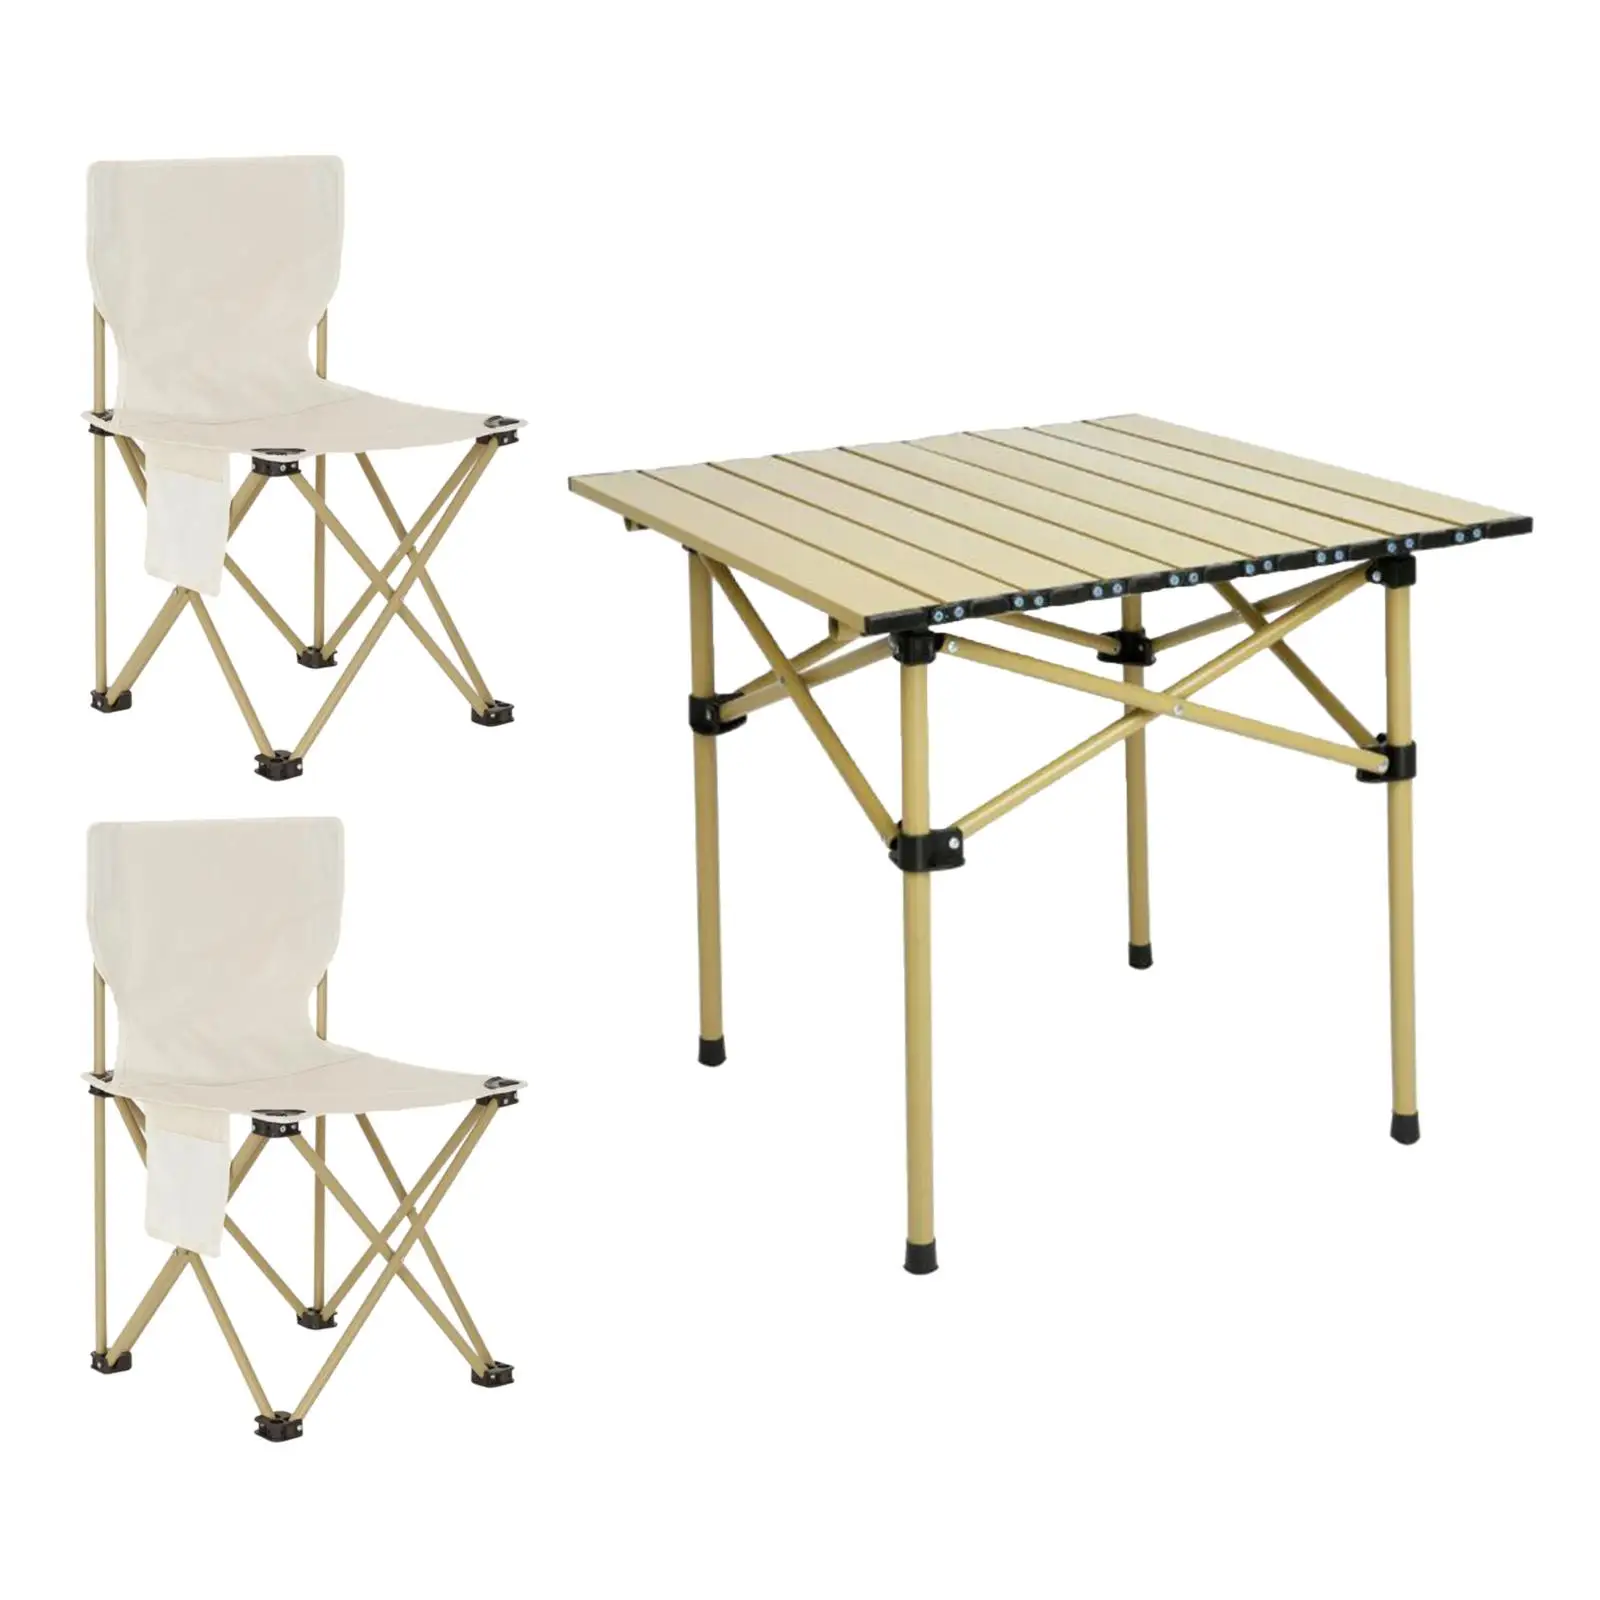 Camping Folding Table Chairs Set with 2 Stools Camp Table Coffee Table Steel Table Foldable Picnic Table for BBQ Backyard Garden